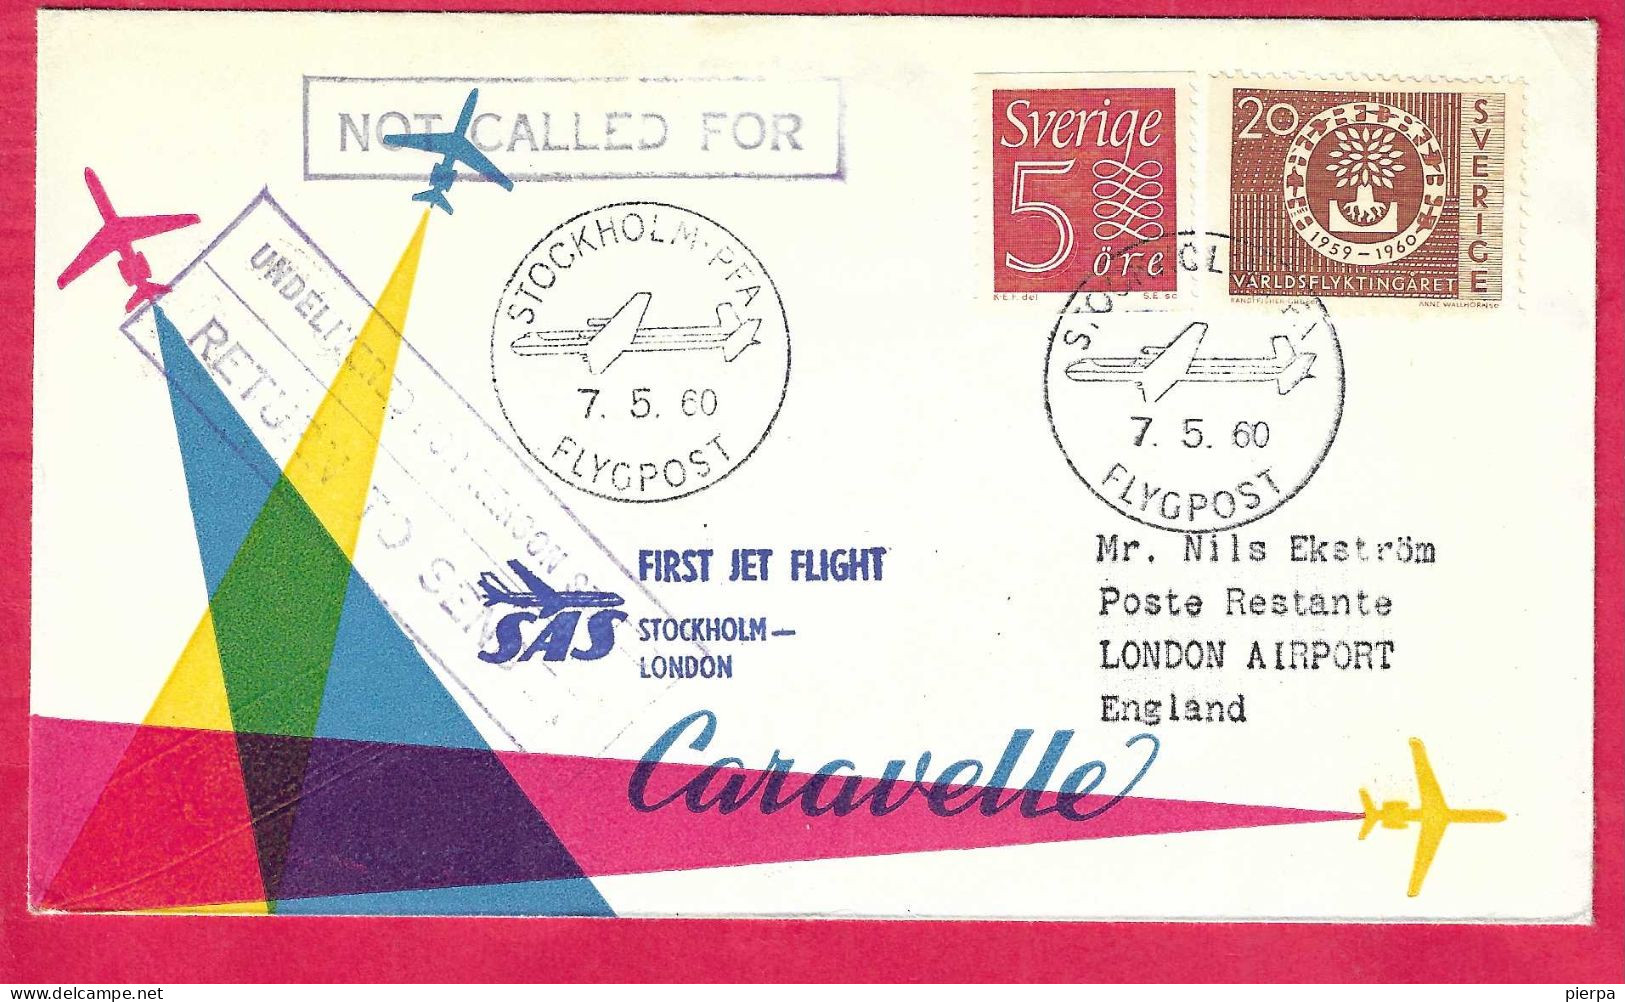 SVERIGE - FIRST CARAVELLE FLIGHT SAS  FROM STOCKHOLM TO LONDON *7.5.60* ON OFFICIAL COVER - Covers & Documents